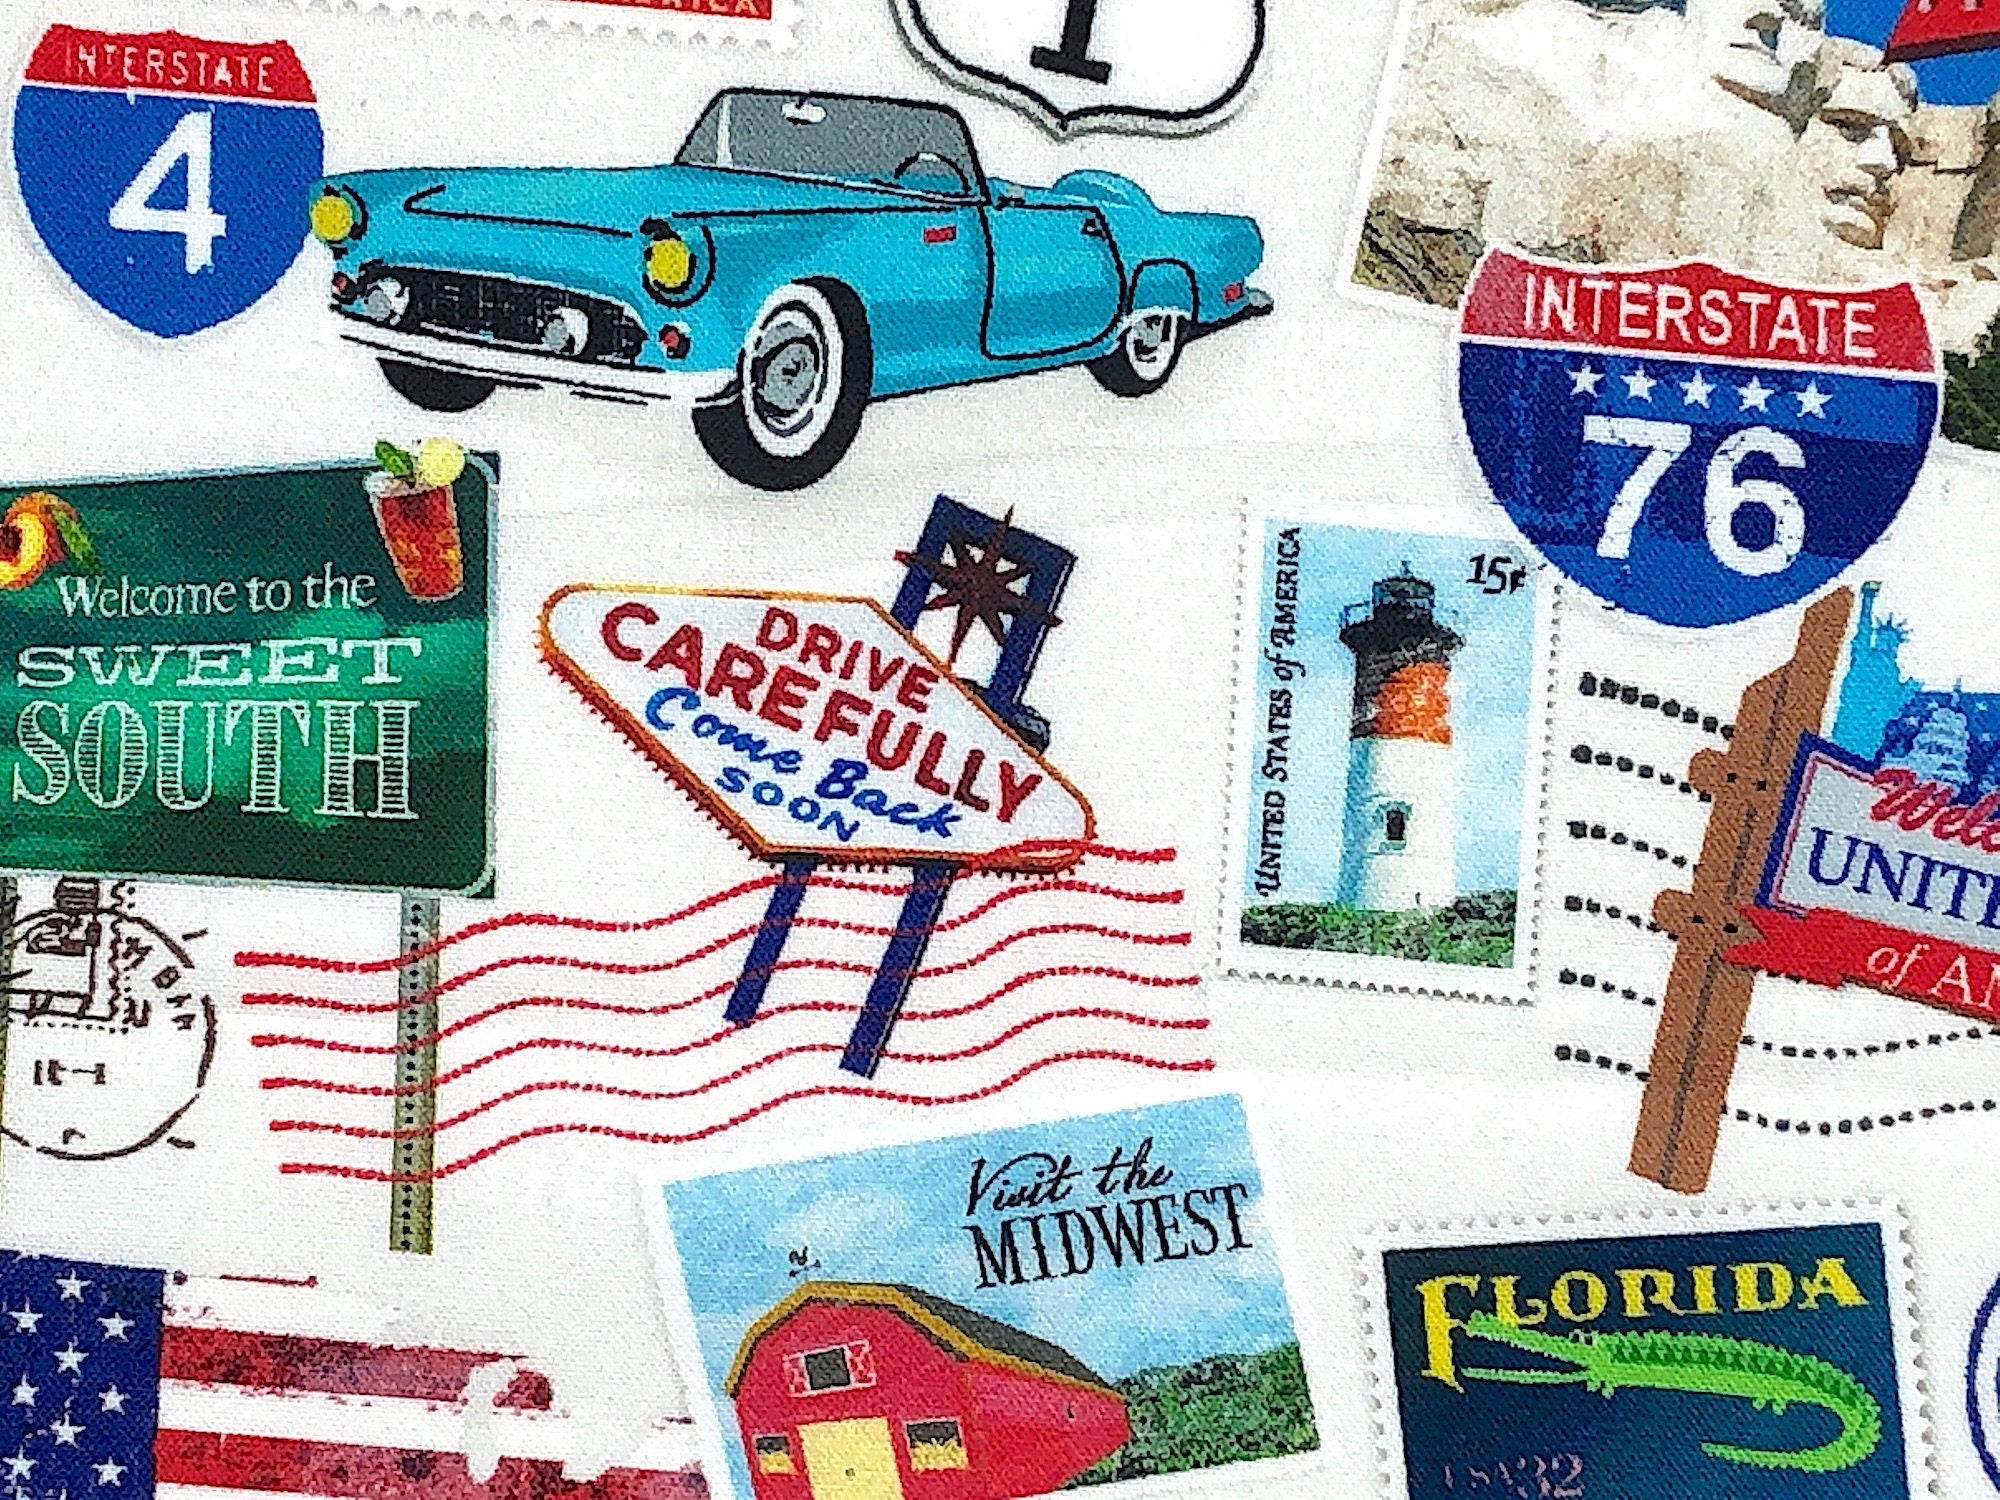 Close up of a blue car, stamps and a welcome to the sweet south sign.